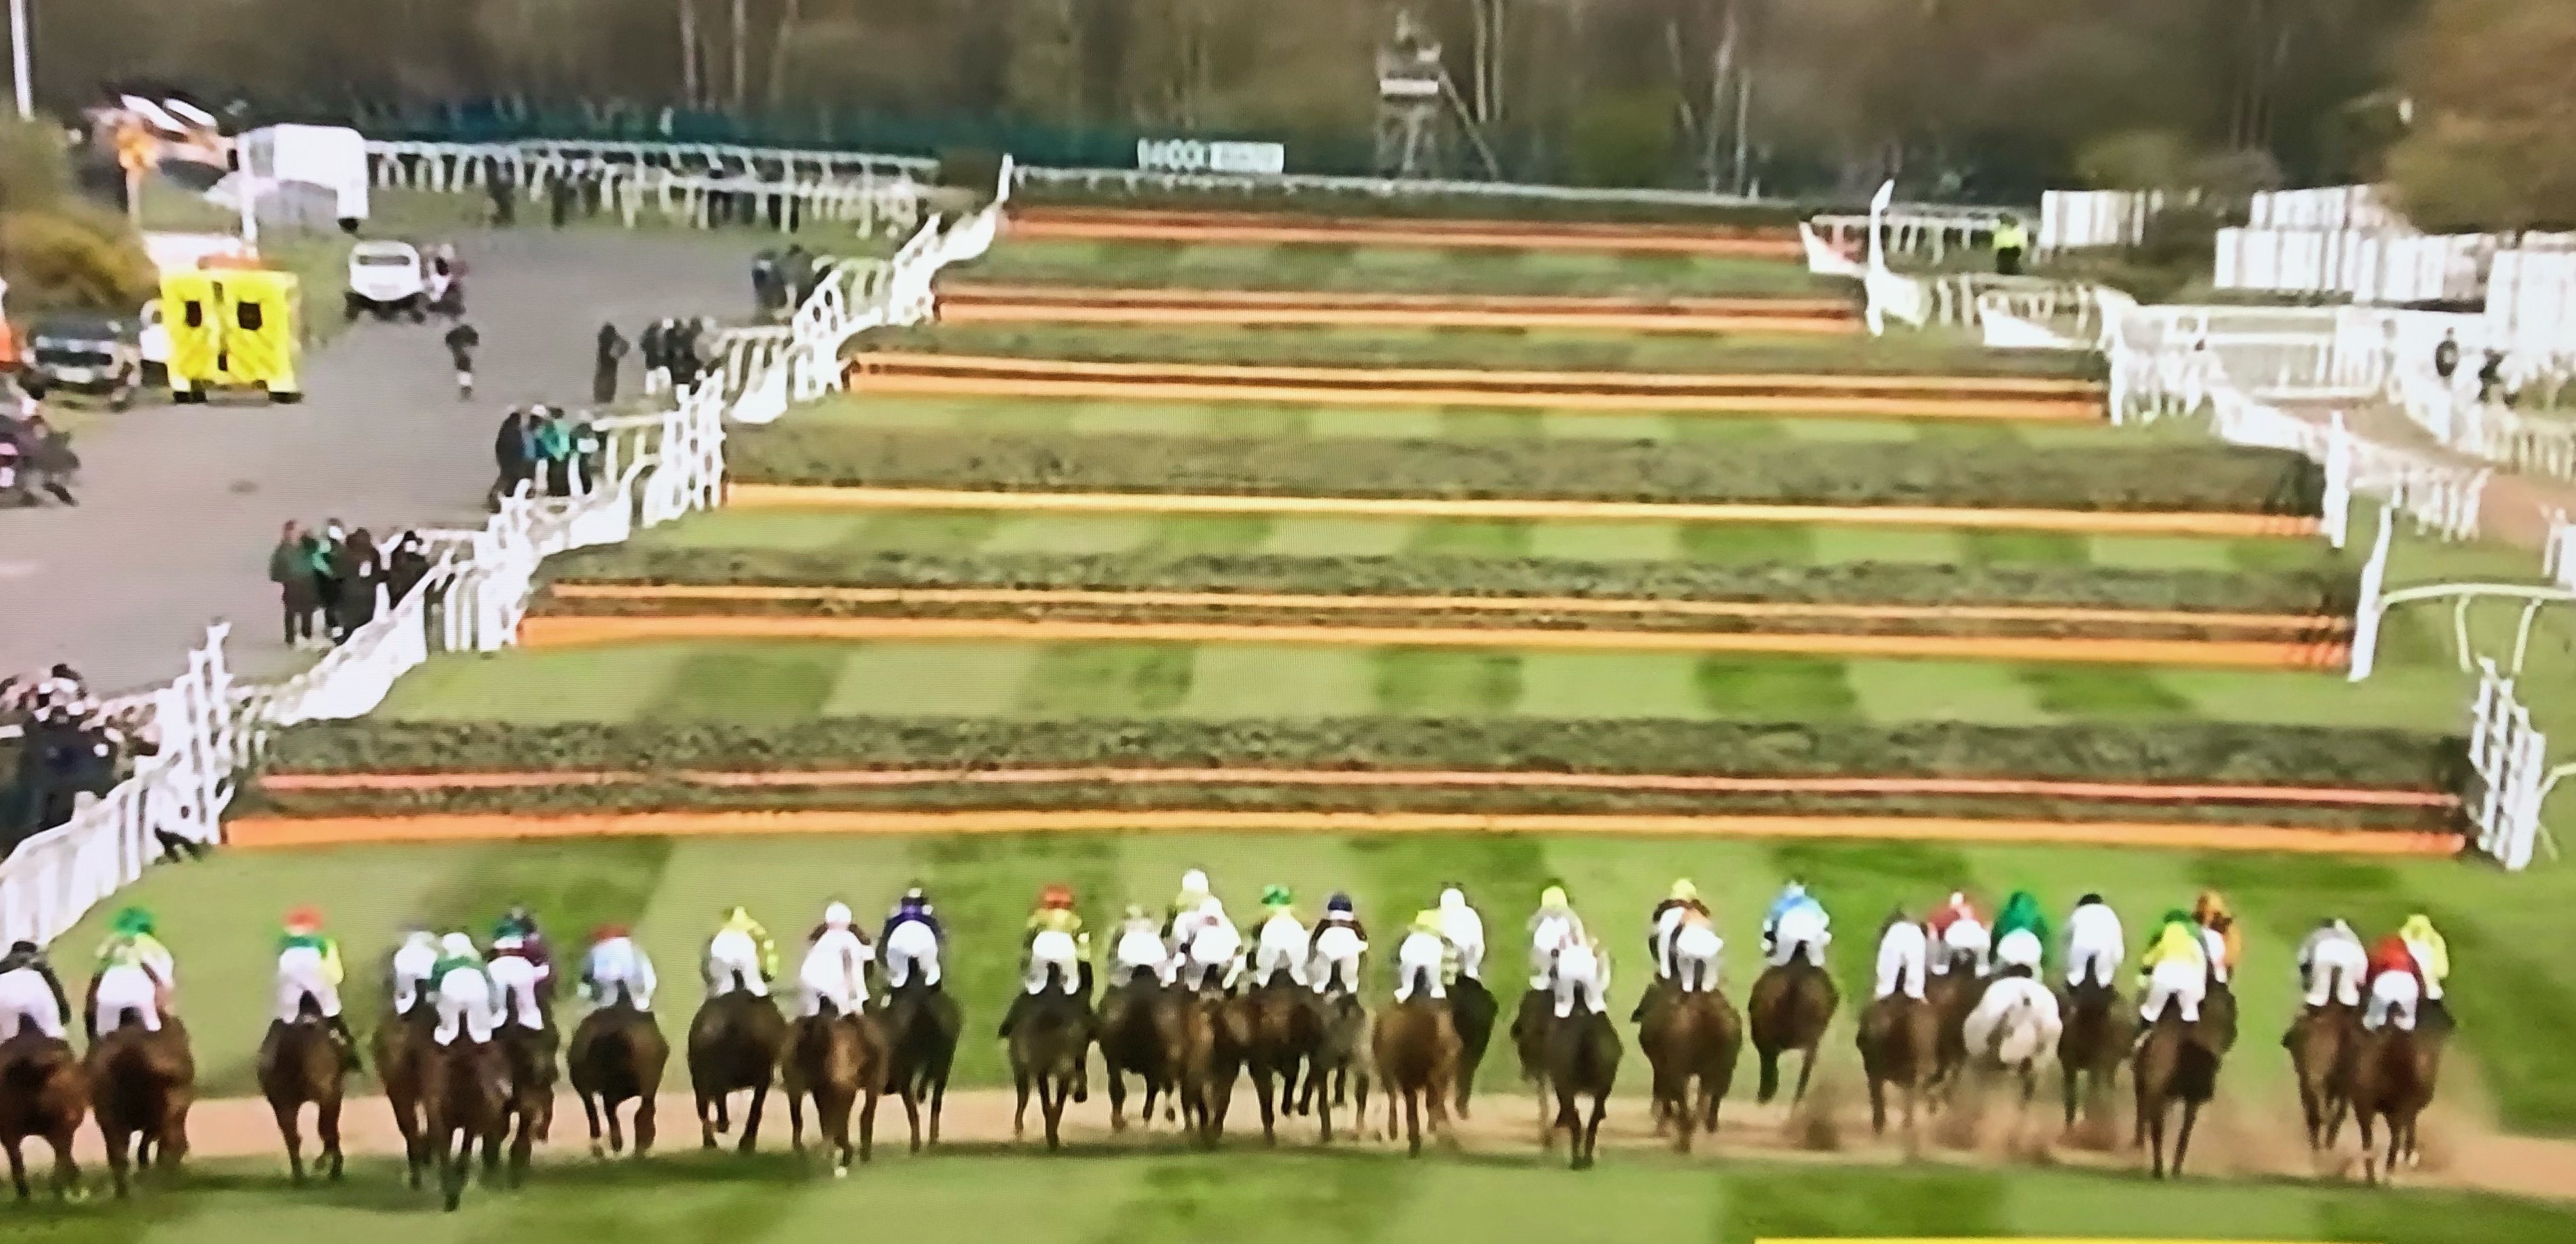 Grand National race with out any spectators